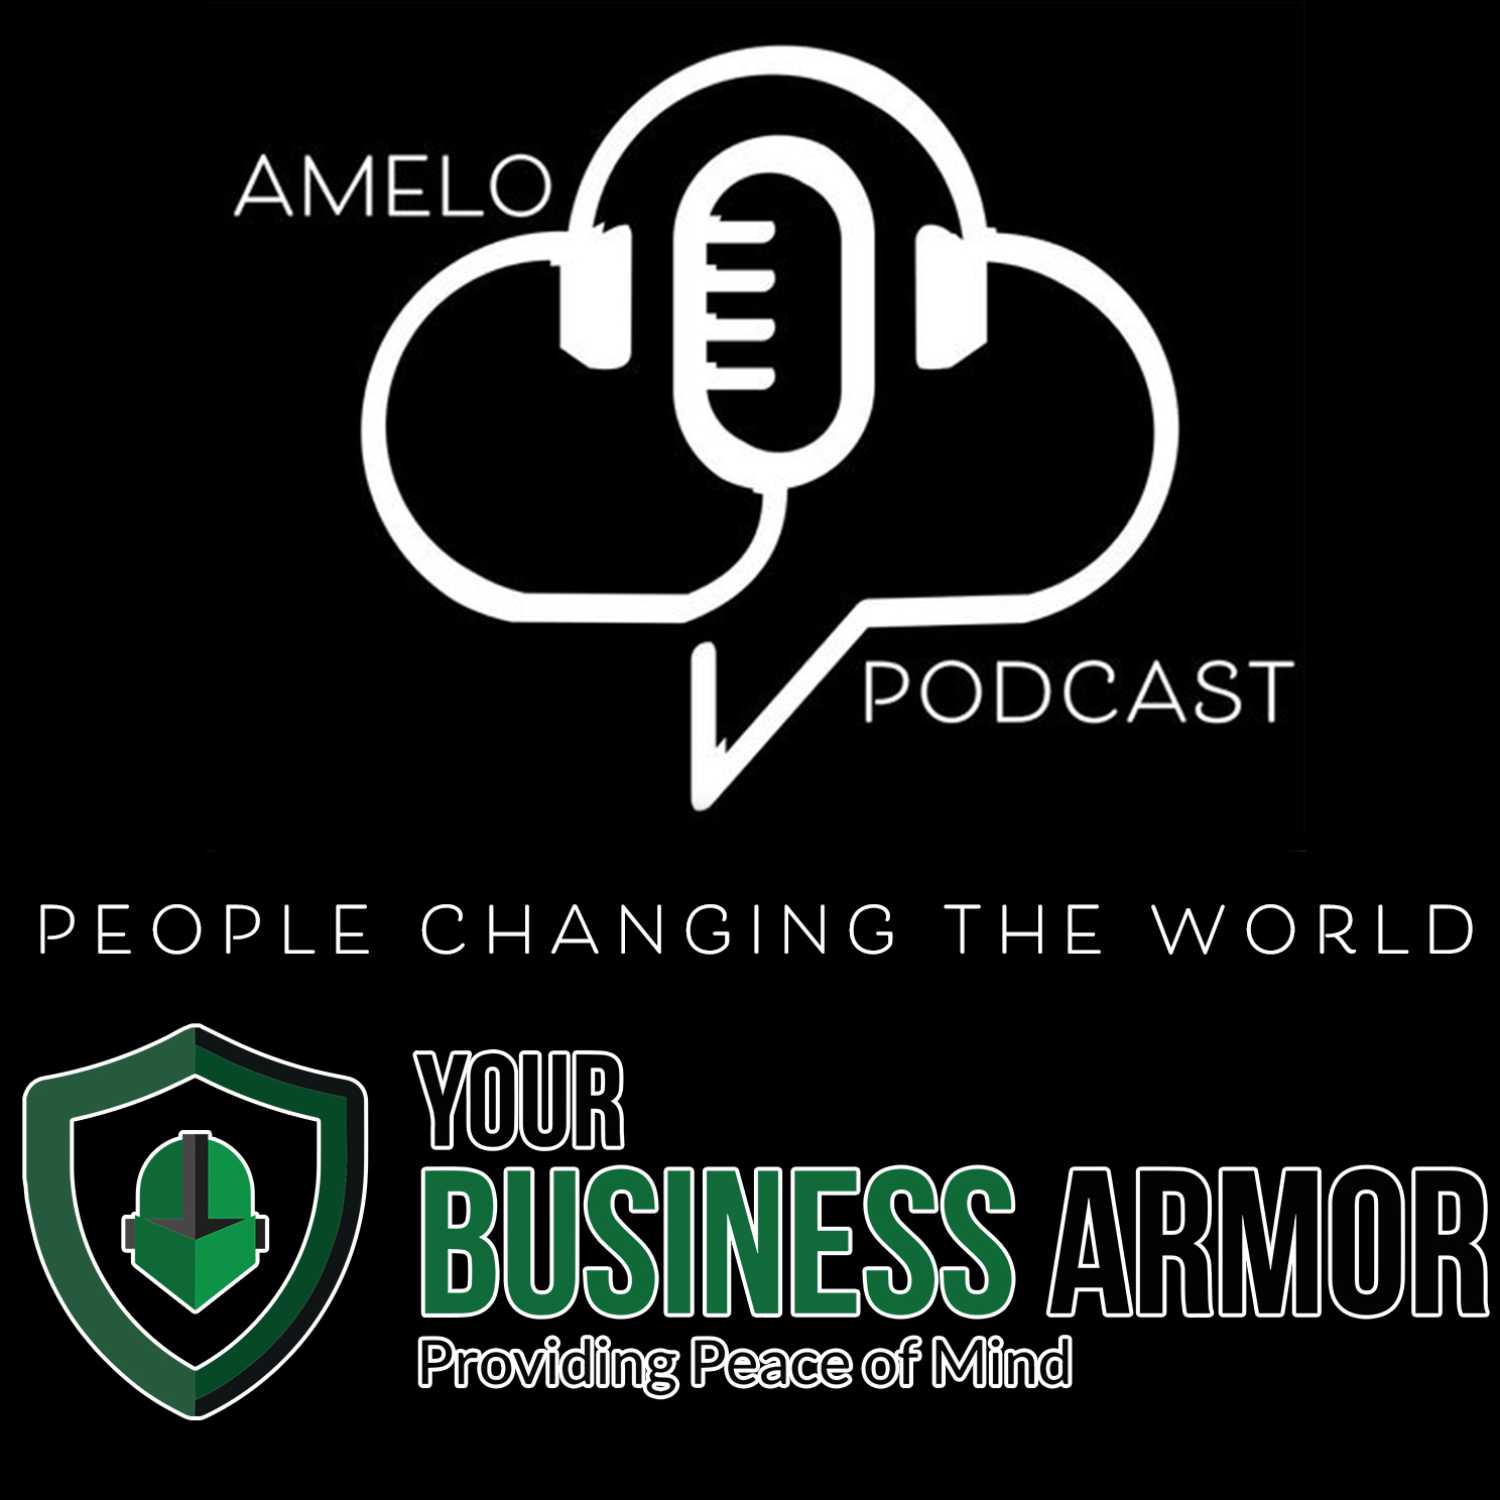 A.Melo interview with Jim McKie - Your Business Armor